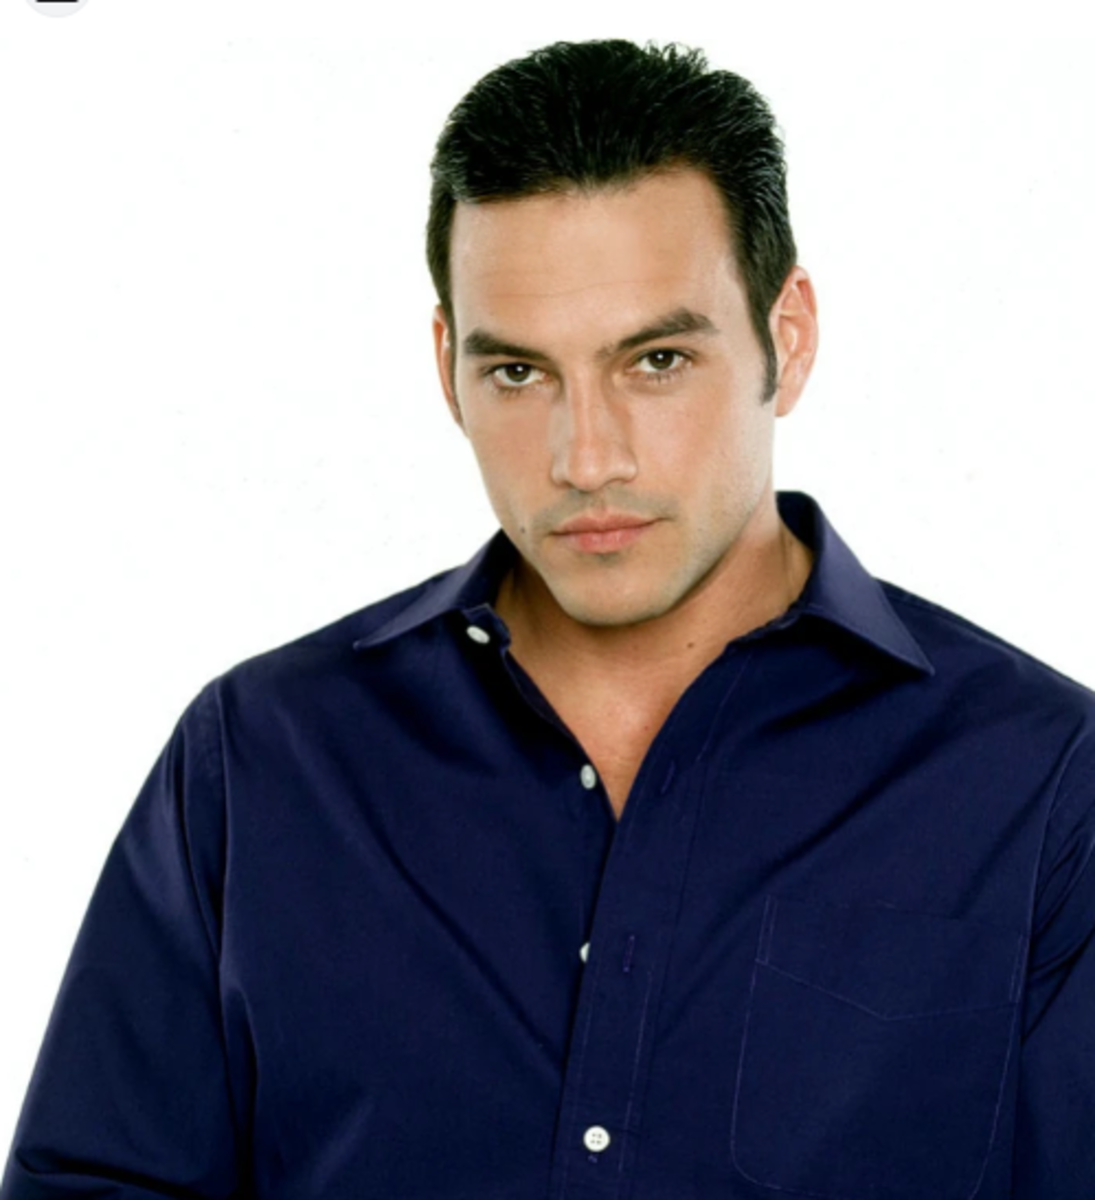 Tyler Christopher All You Need to Know